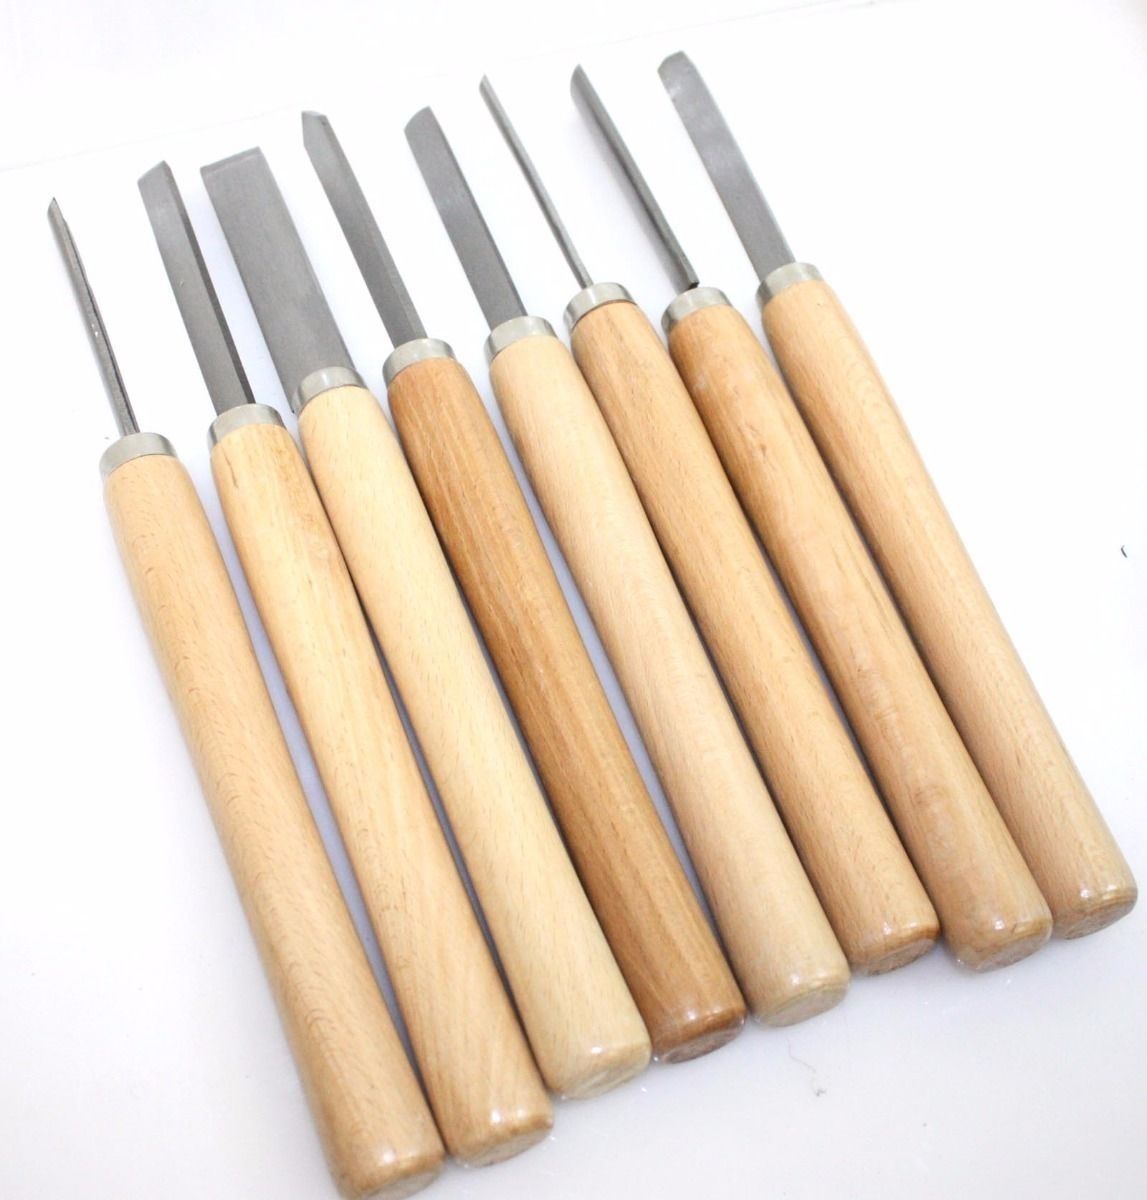 8pc Wood Lathe Chisel Set Turning Tools Woodworking Gouge Skew Parting Spear 